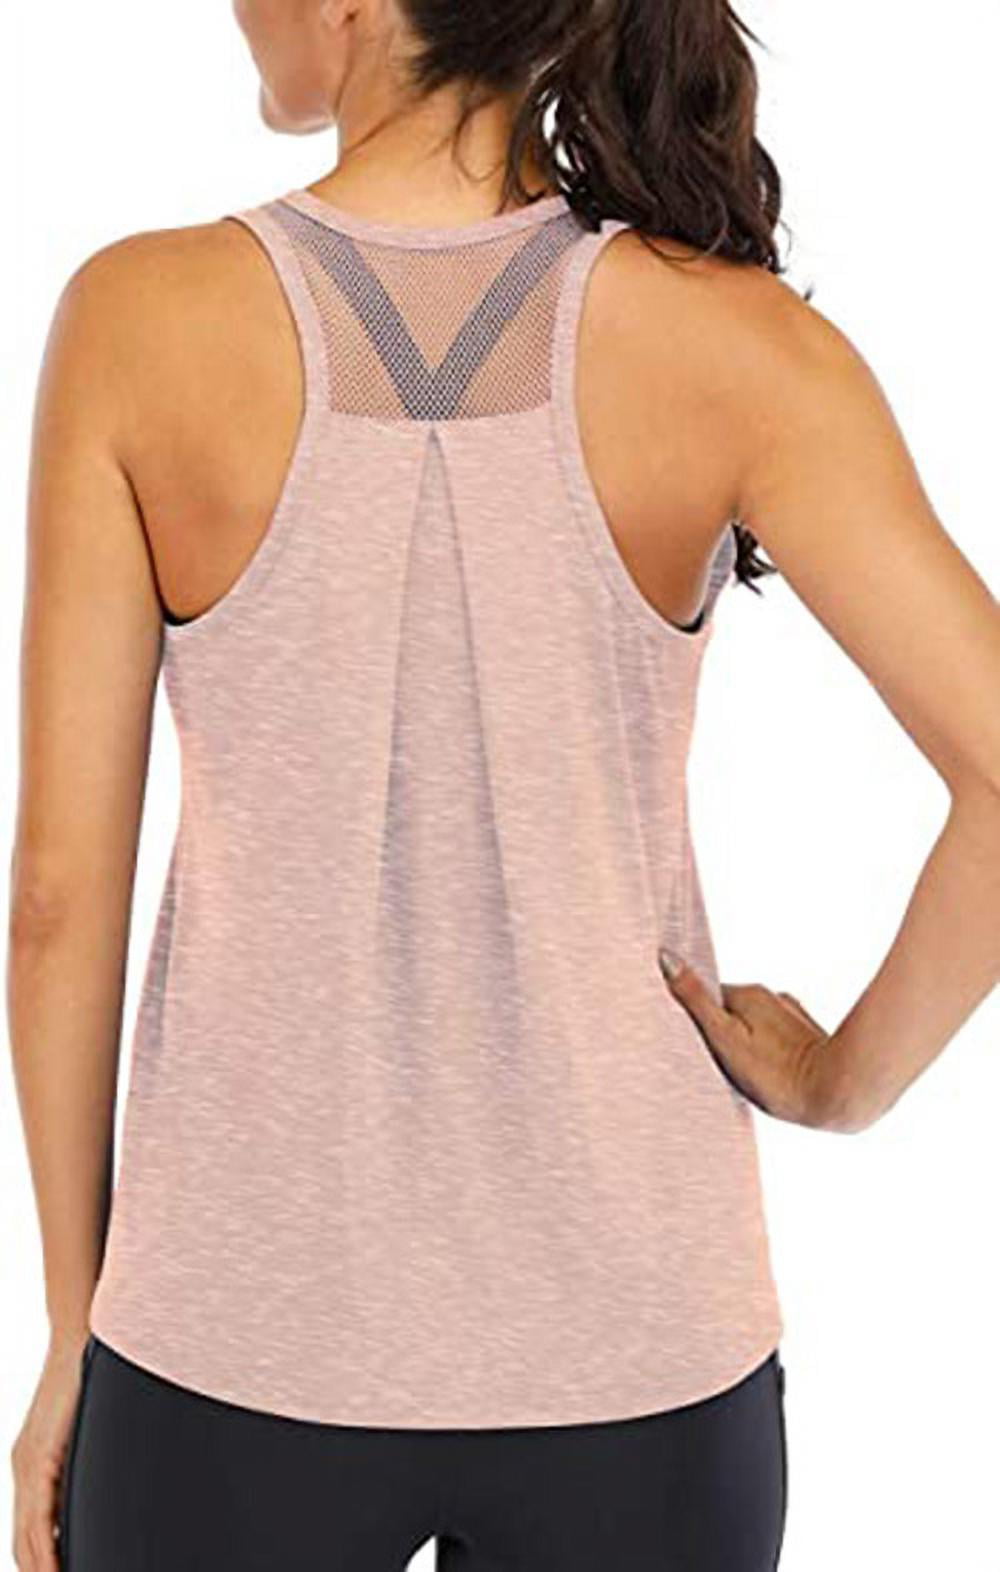 Workout Tops for Women Loose fit Racerback Tank Tops for Women Mesh  Backless Muscle Tank Running Tank Tops Light Blue XL 